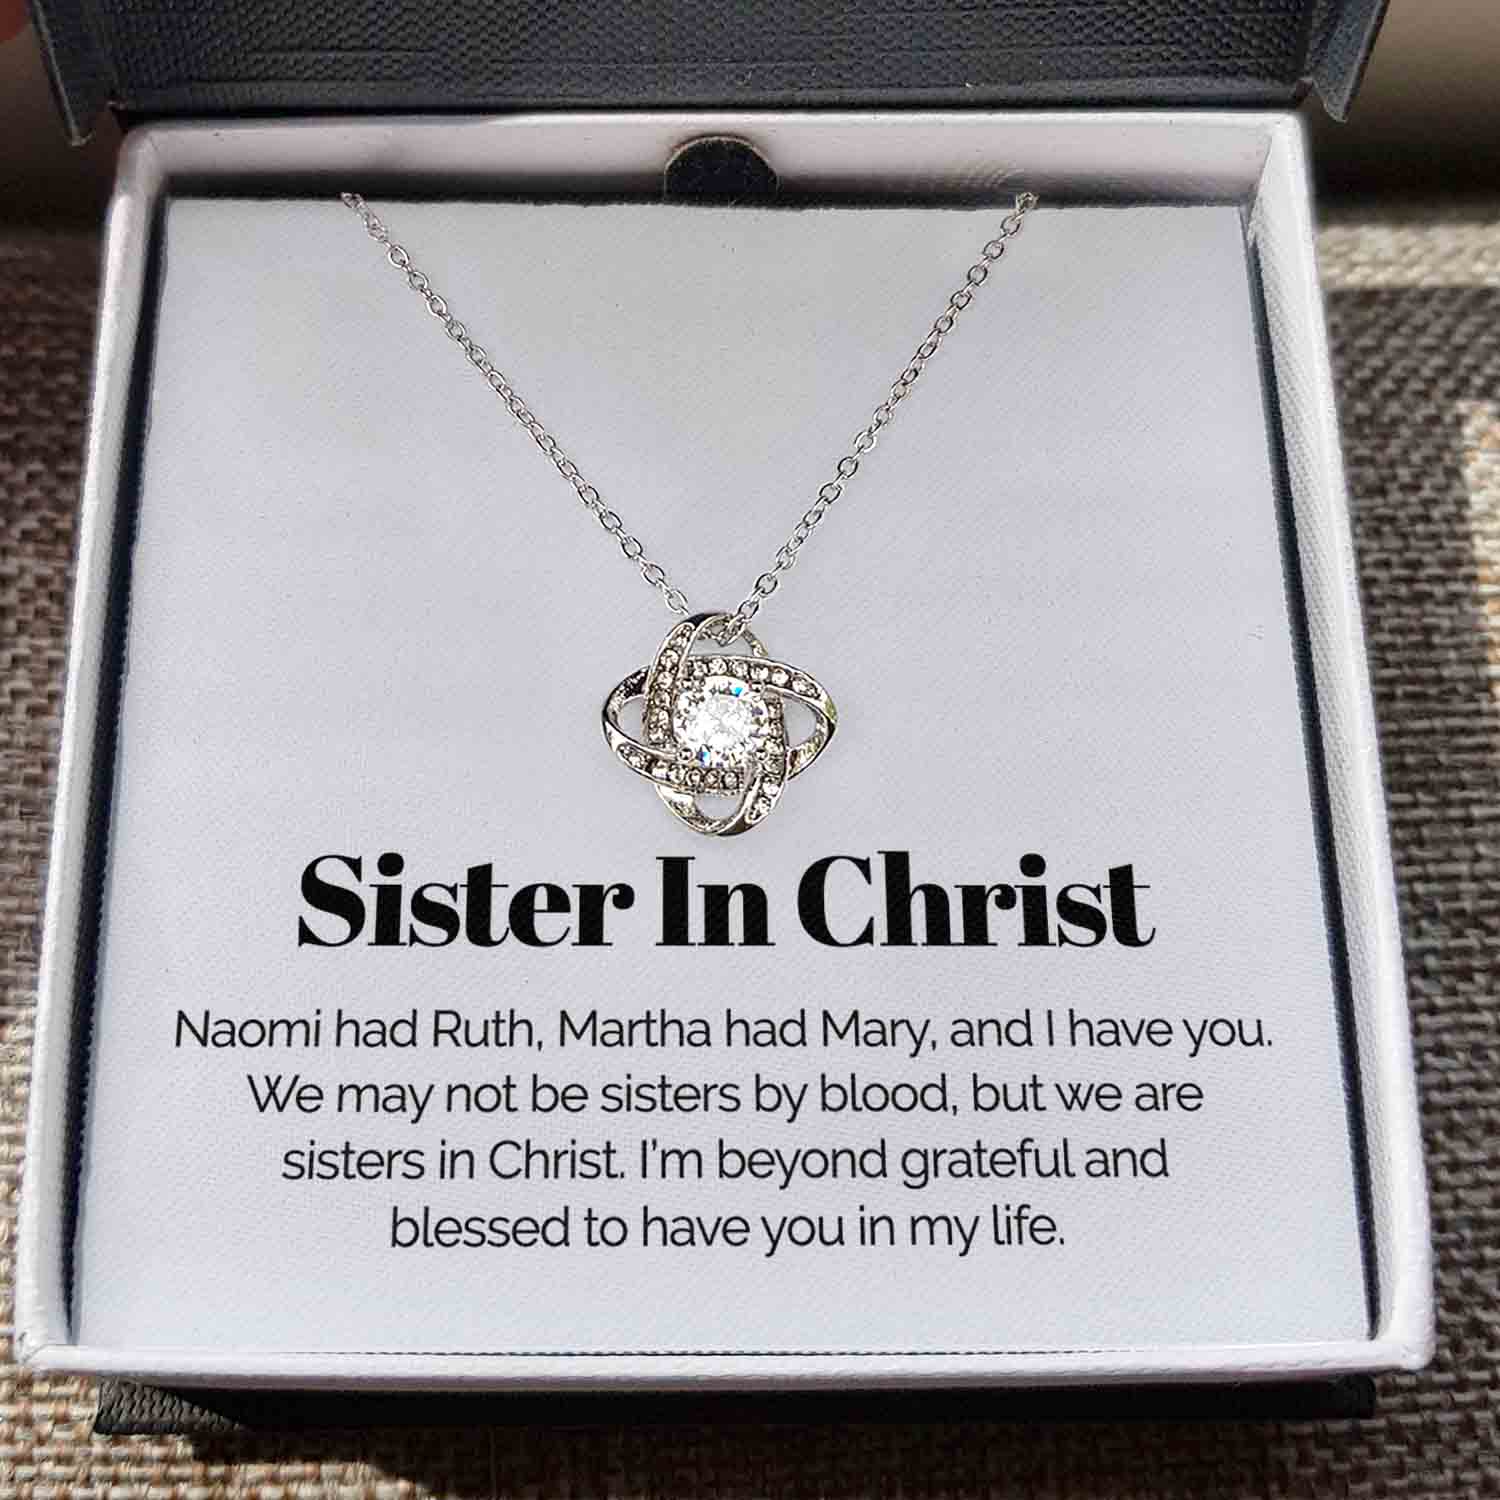 ShineOn Fulfillment Jewelry Standard Box To My Sister In Christ - Blessed To Have You In My Life - Love Knot Necklace